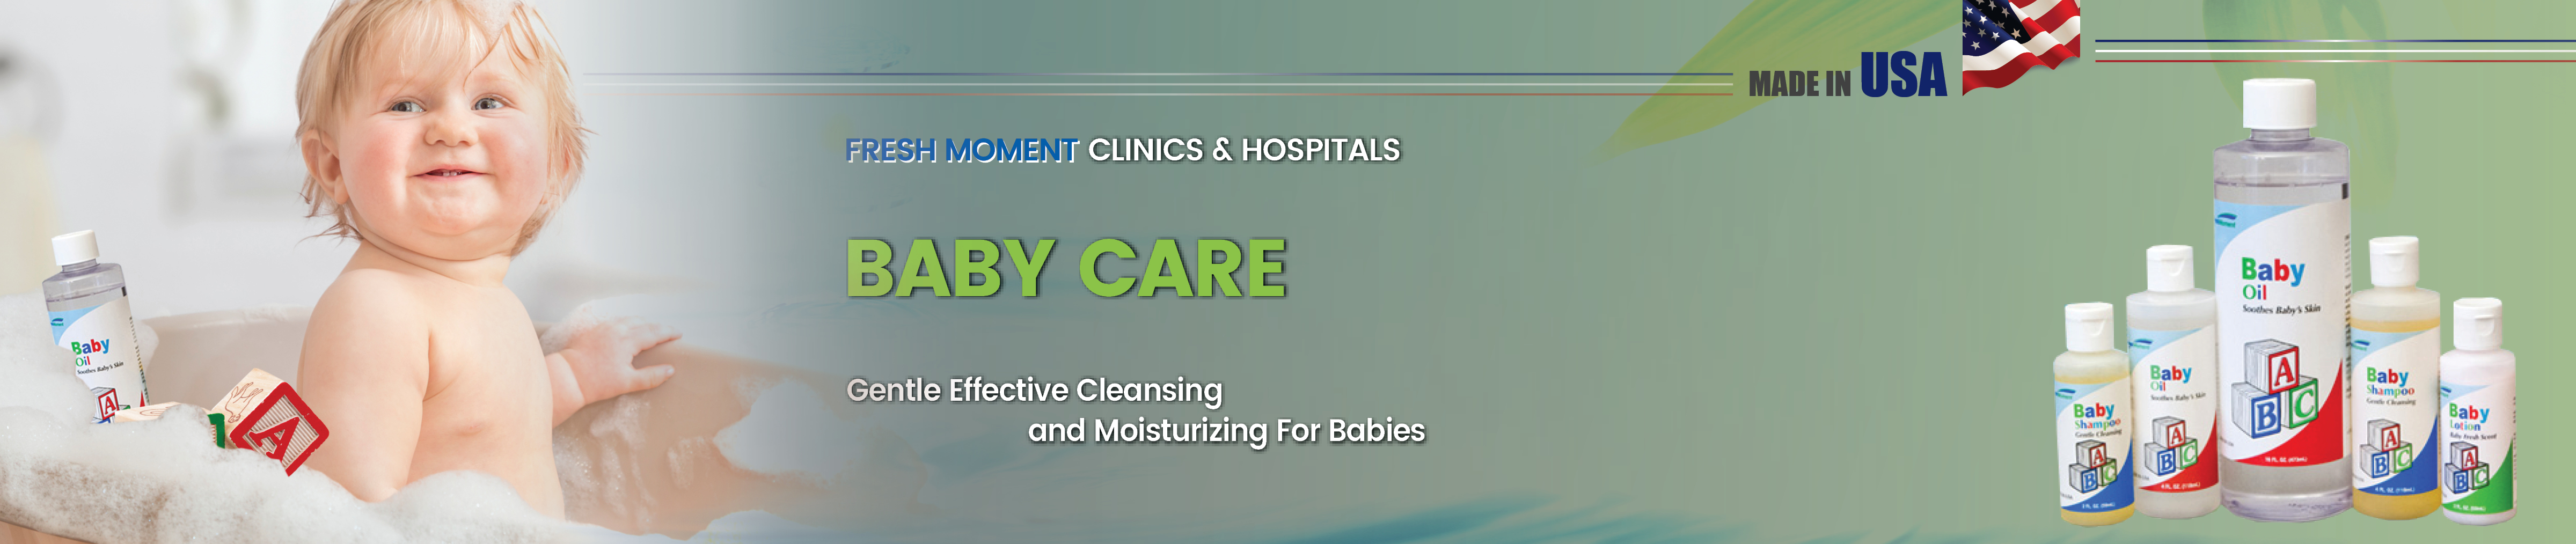 Fresh Moment Baby Care